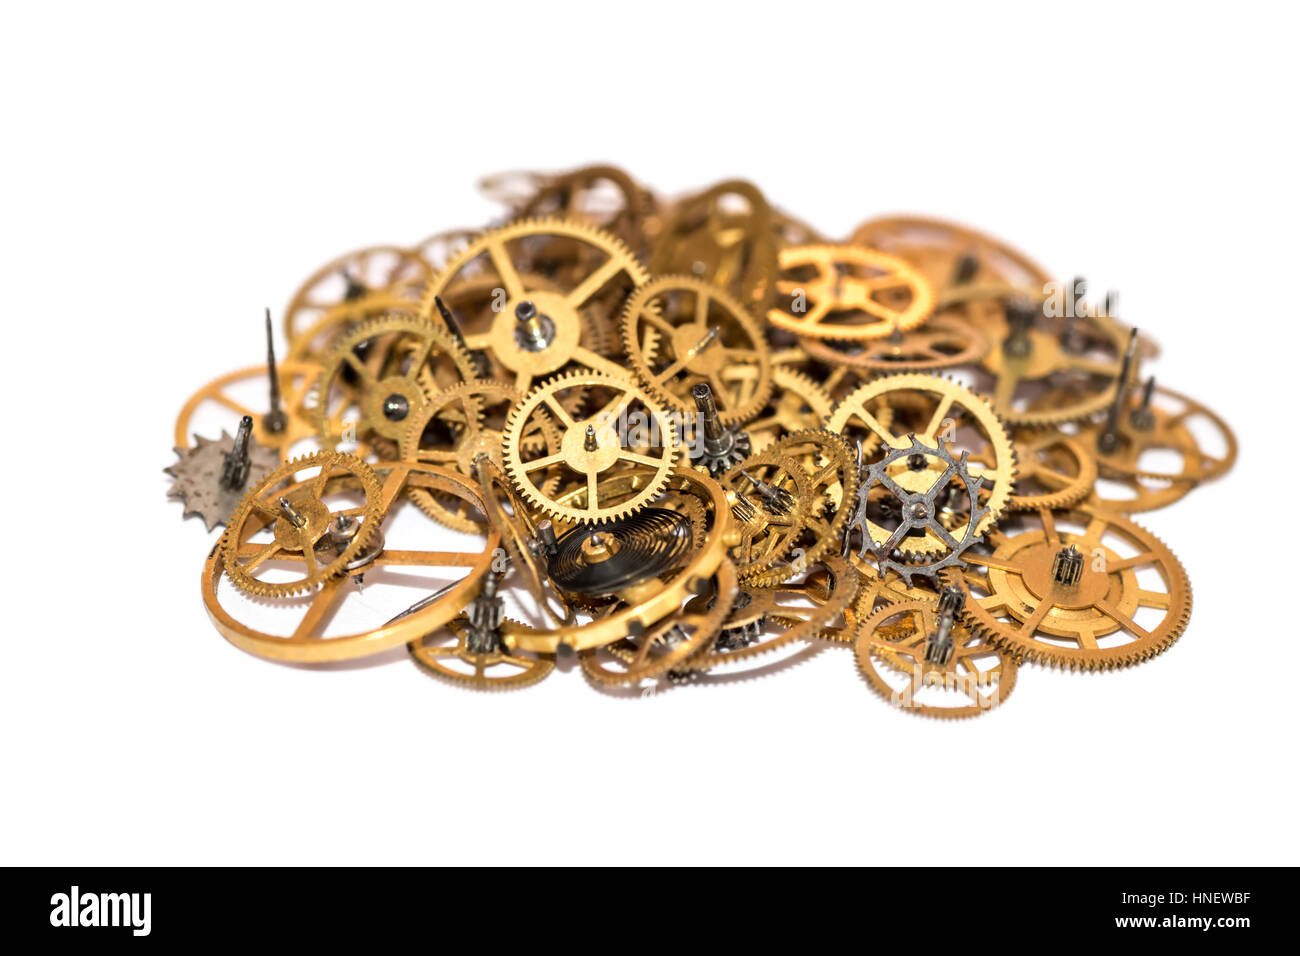 A pile of gear. Many mechanisms. Old vintage gears. Part of clockwork. The natural color and texture. Focus on front, blurred background. Golden cogs. Stock Photo